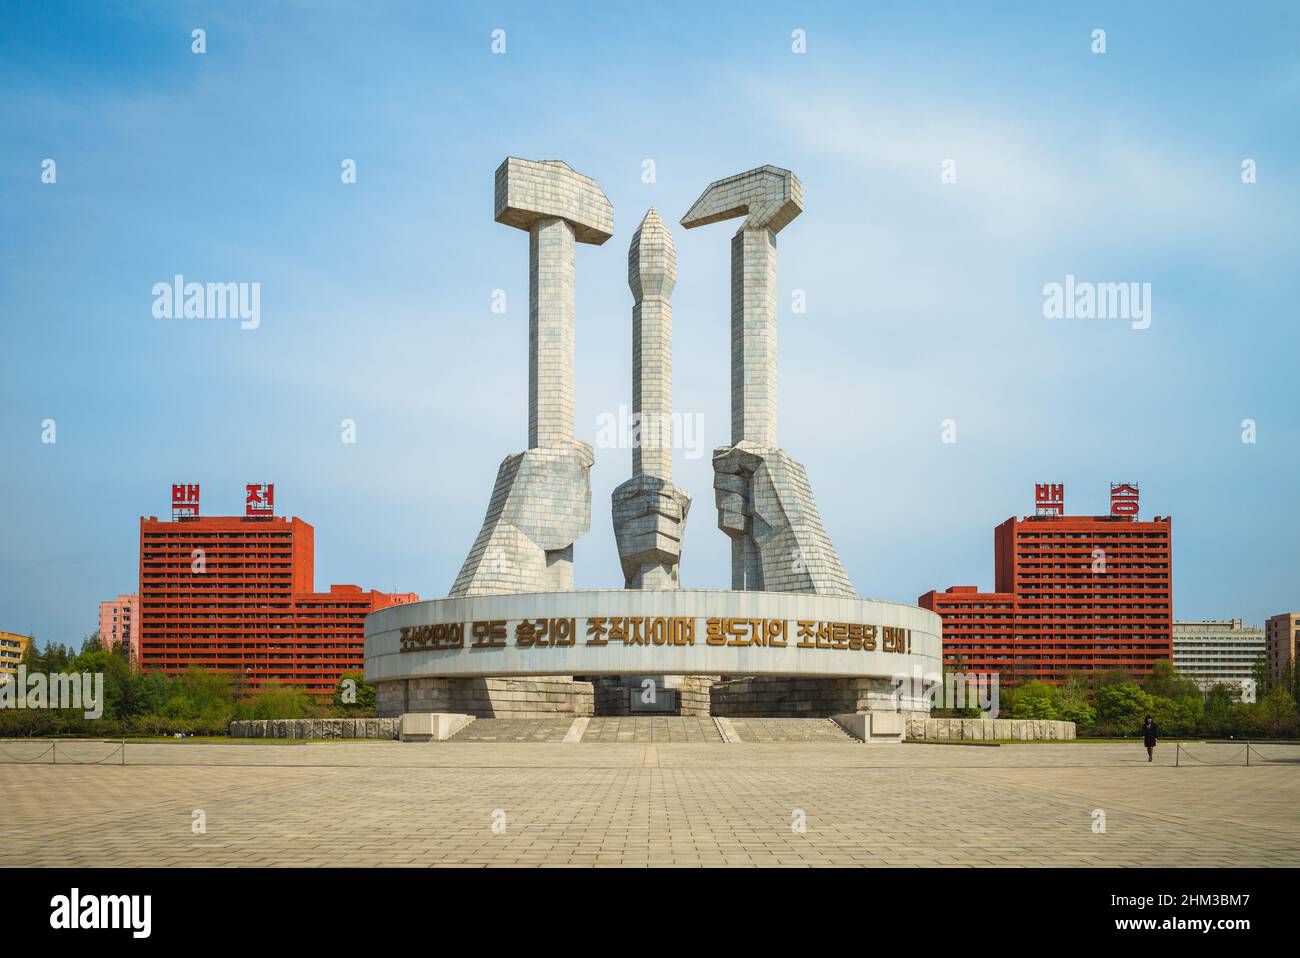 April 29, 2019: Monument to Party Founding, which was completed on 10 October 1995 and is located at Pyongyang, North Korea. The element symbolizes th Stock Photo